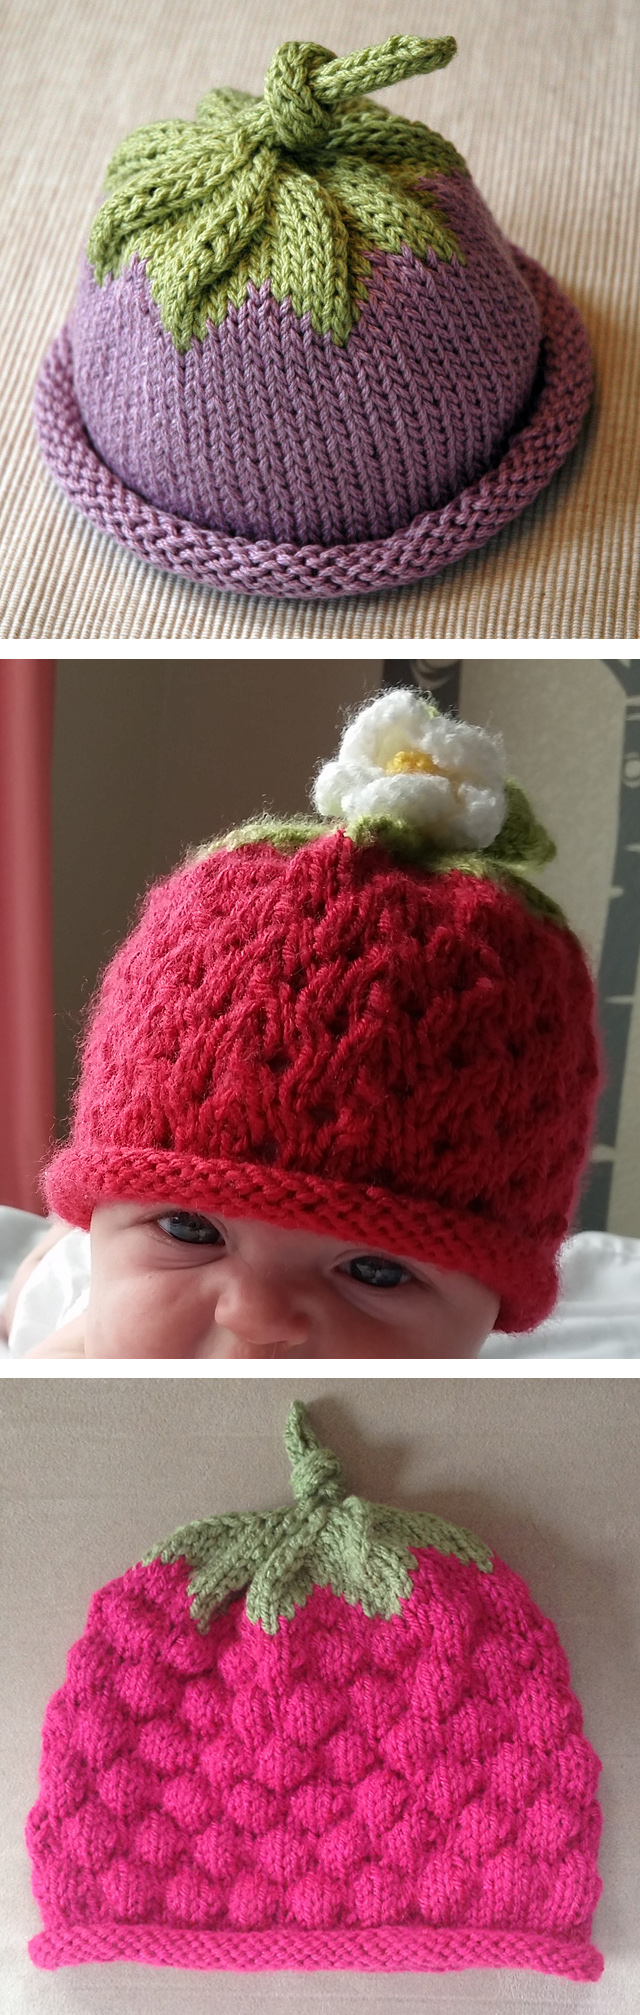 Free Knitting Pattern for Berry Baby Hat